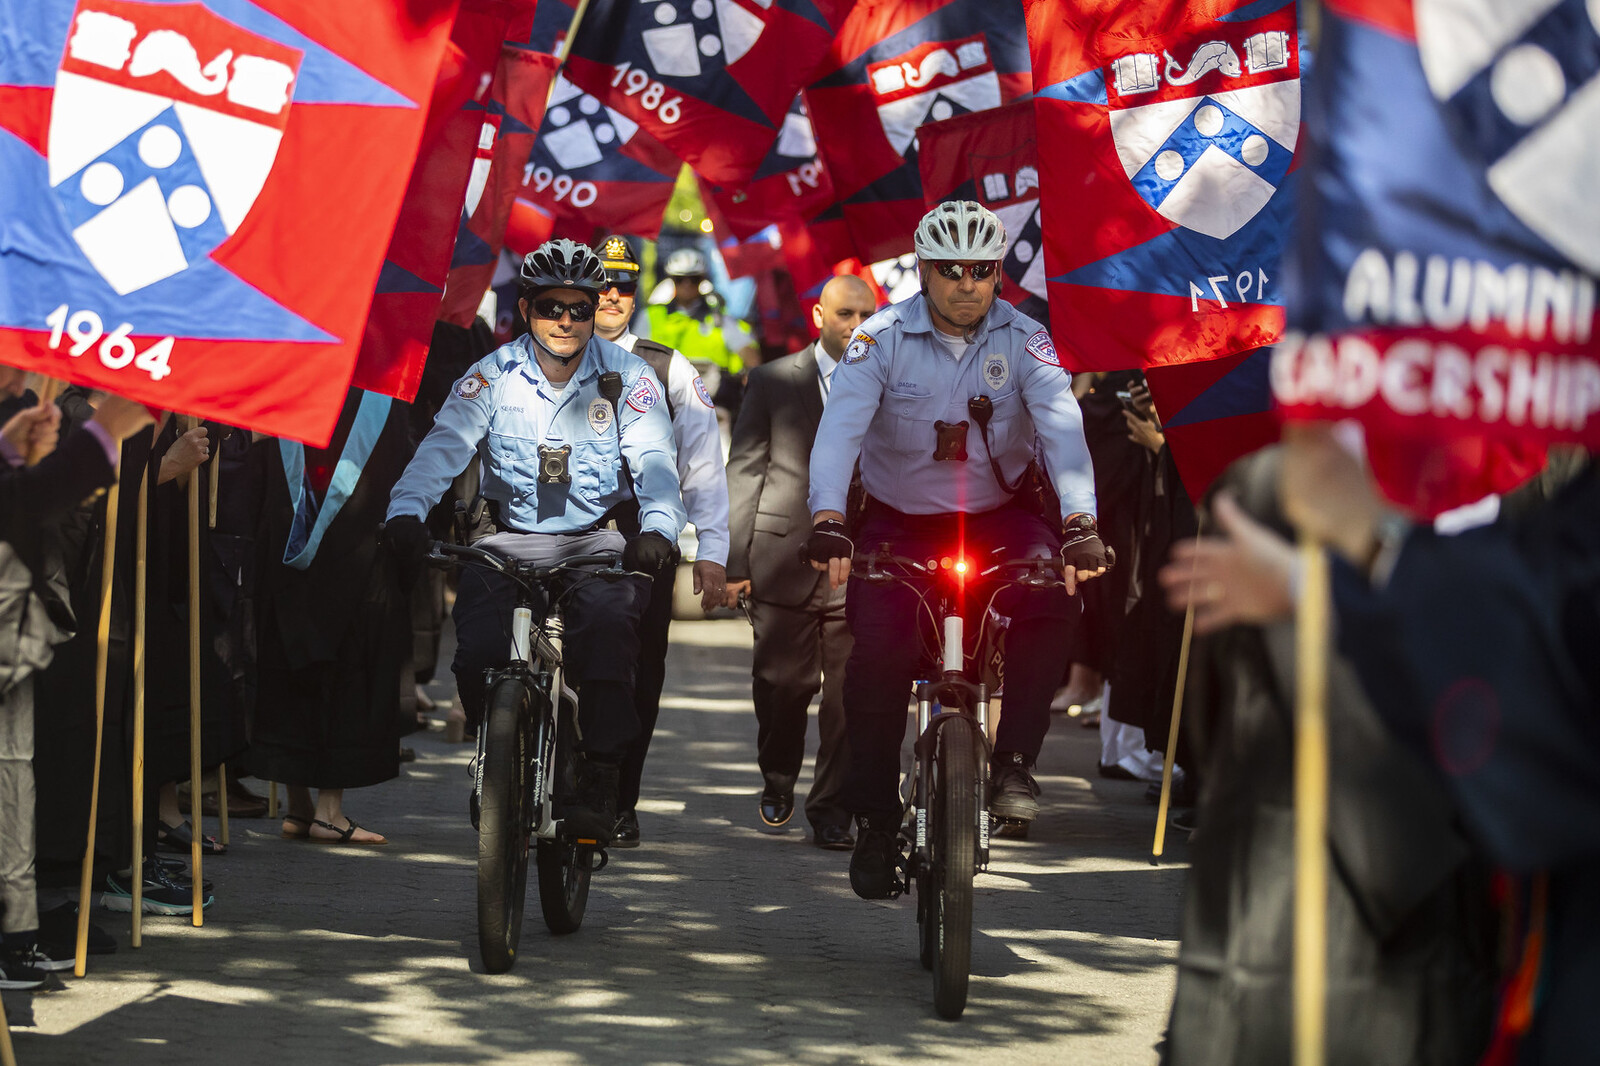 public safety on bikes during commencement